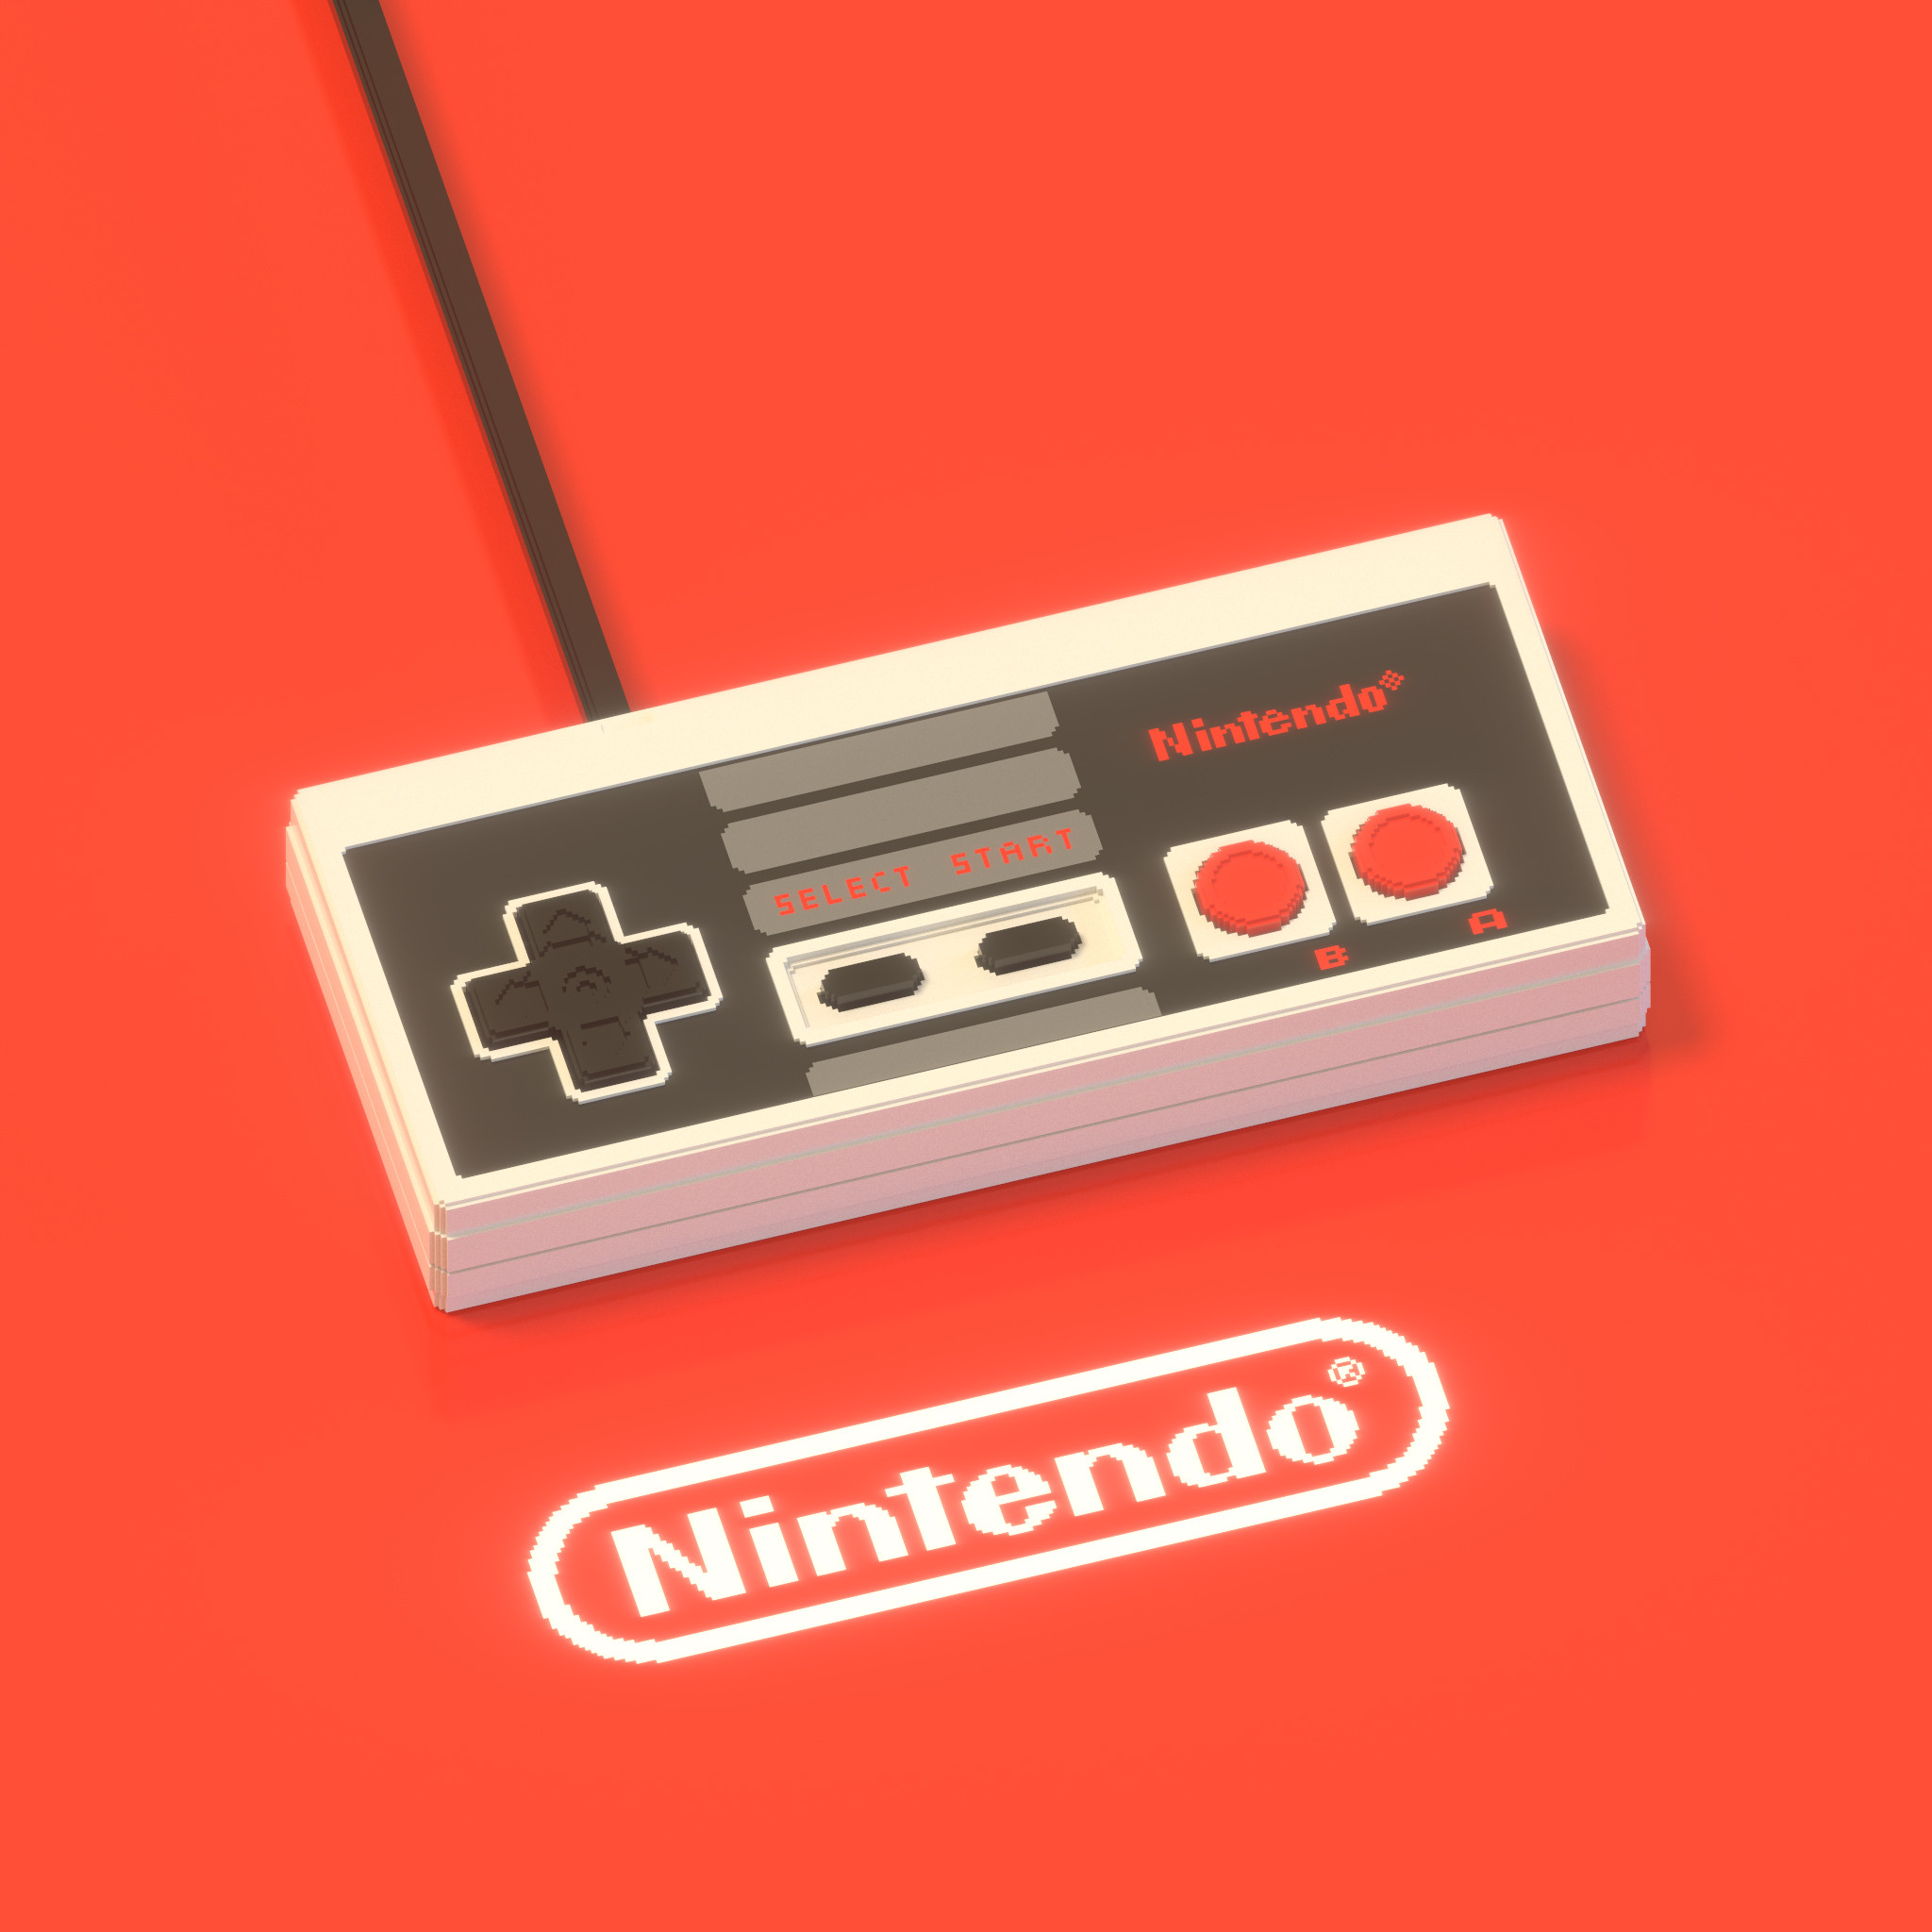 Voxel model rendering of a Nintendo Entertainment System (NES) Controller.